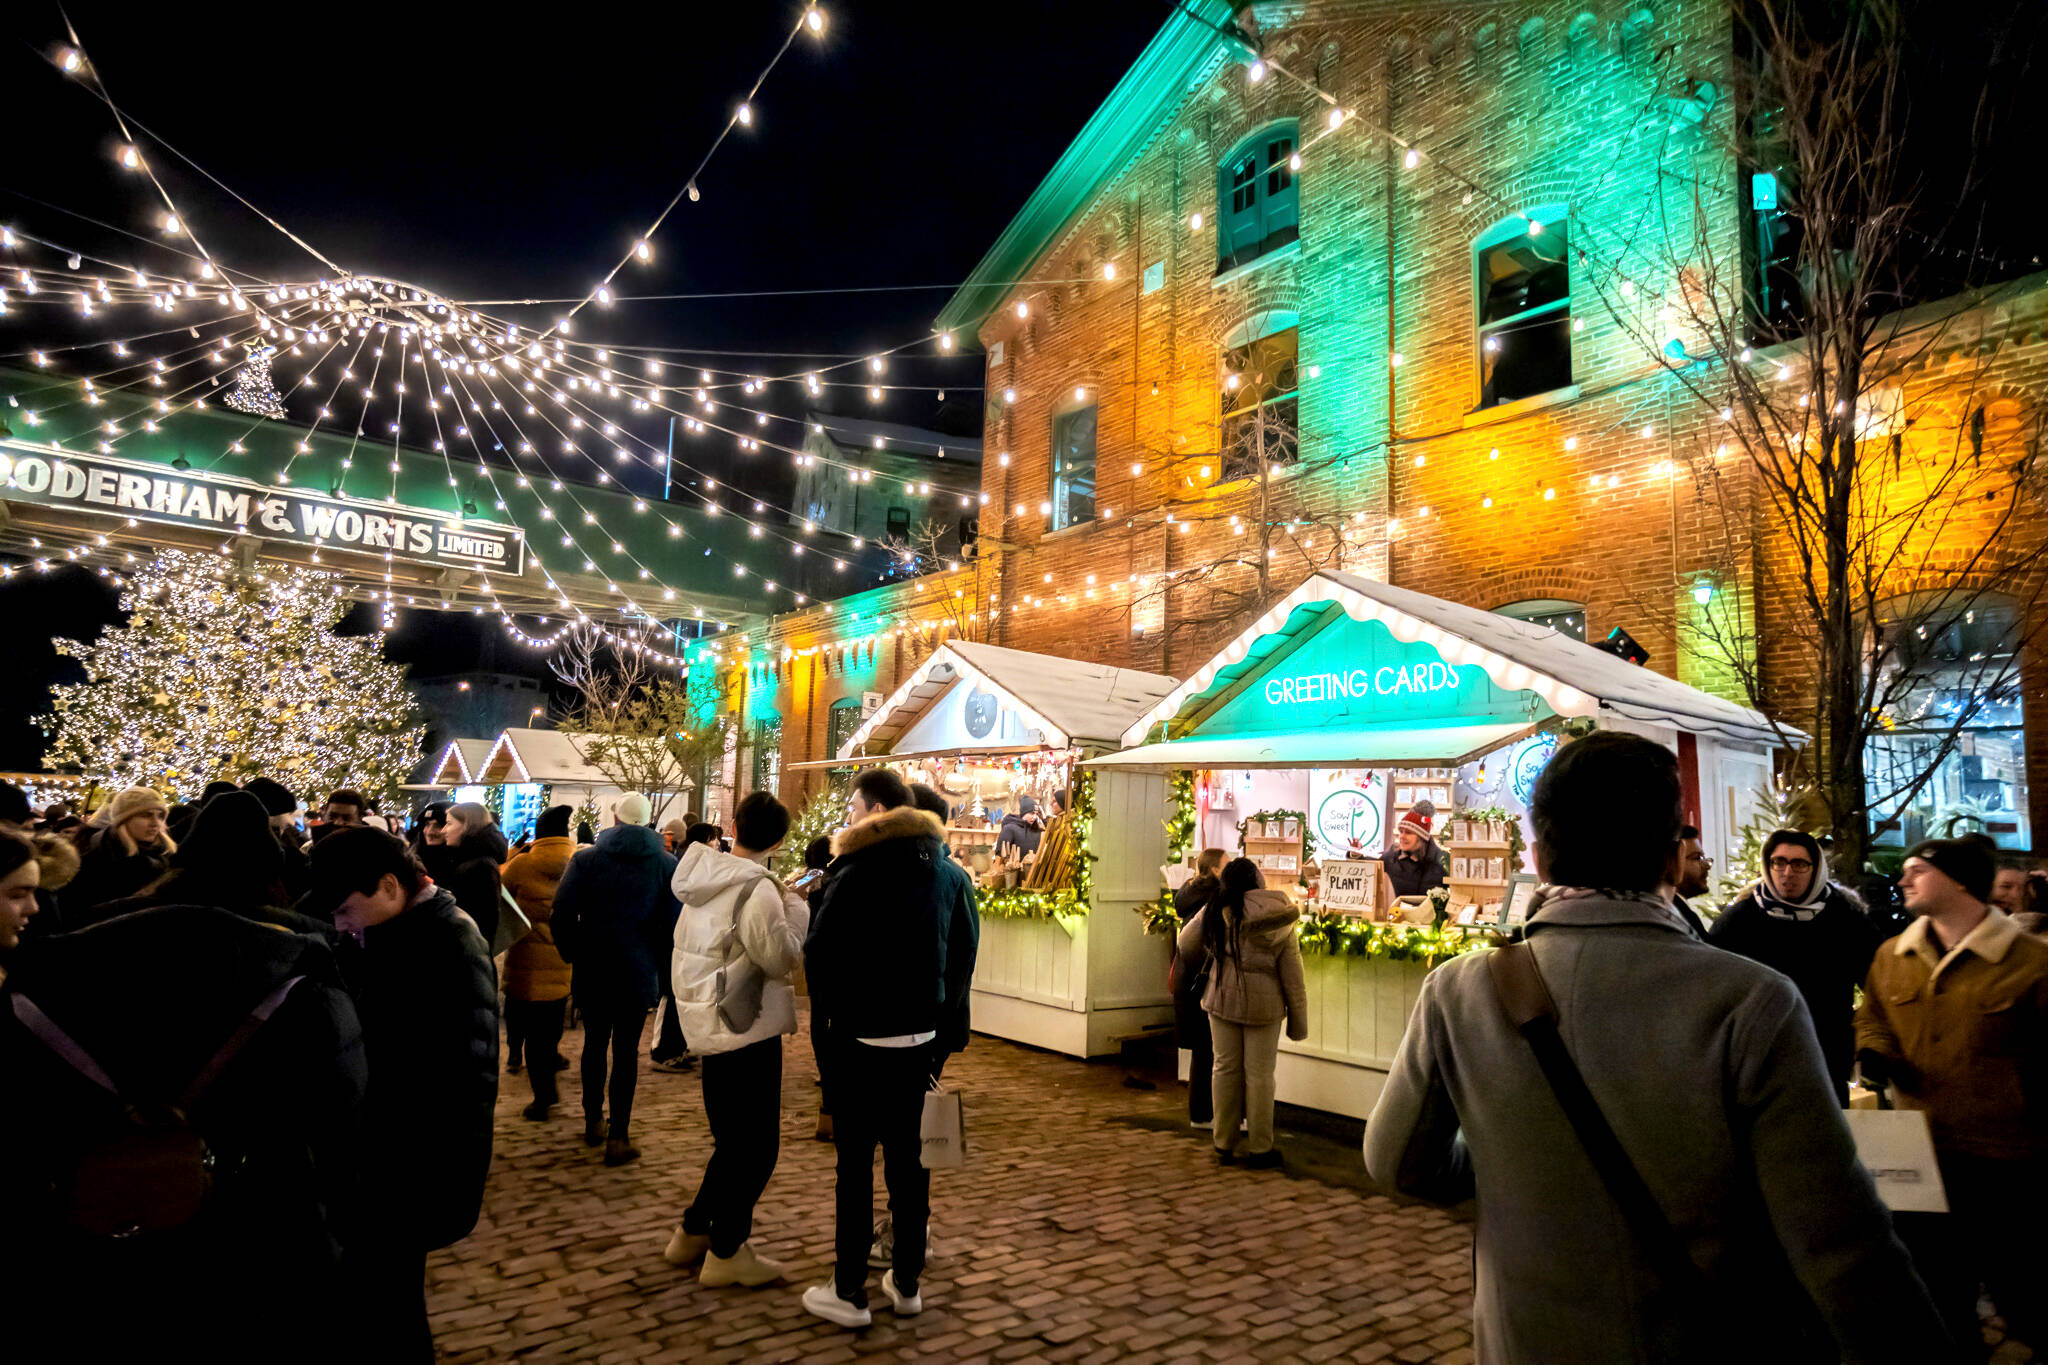 Here's what the Toronto Christmas market in the Distillery District